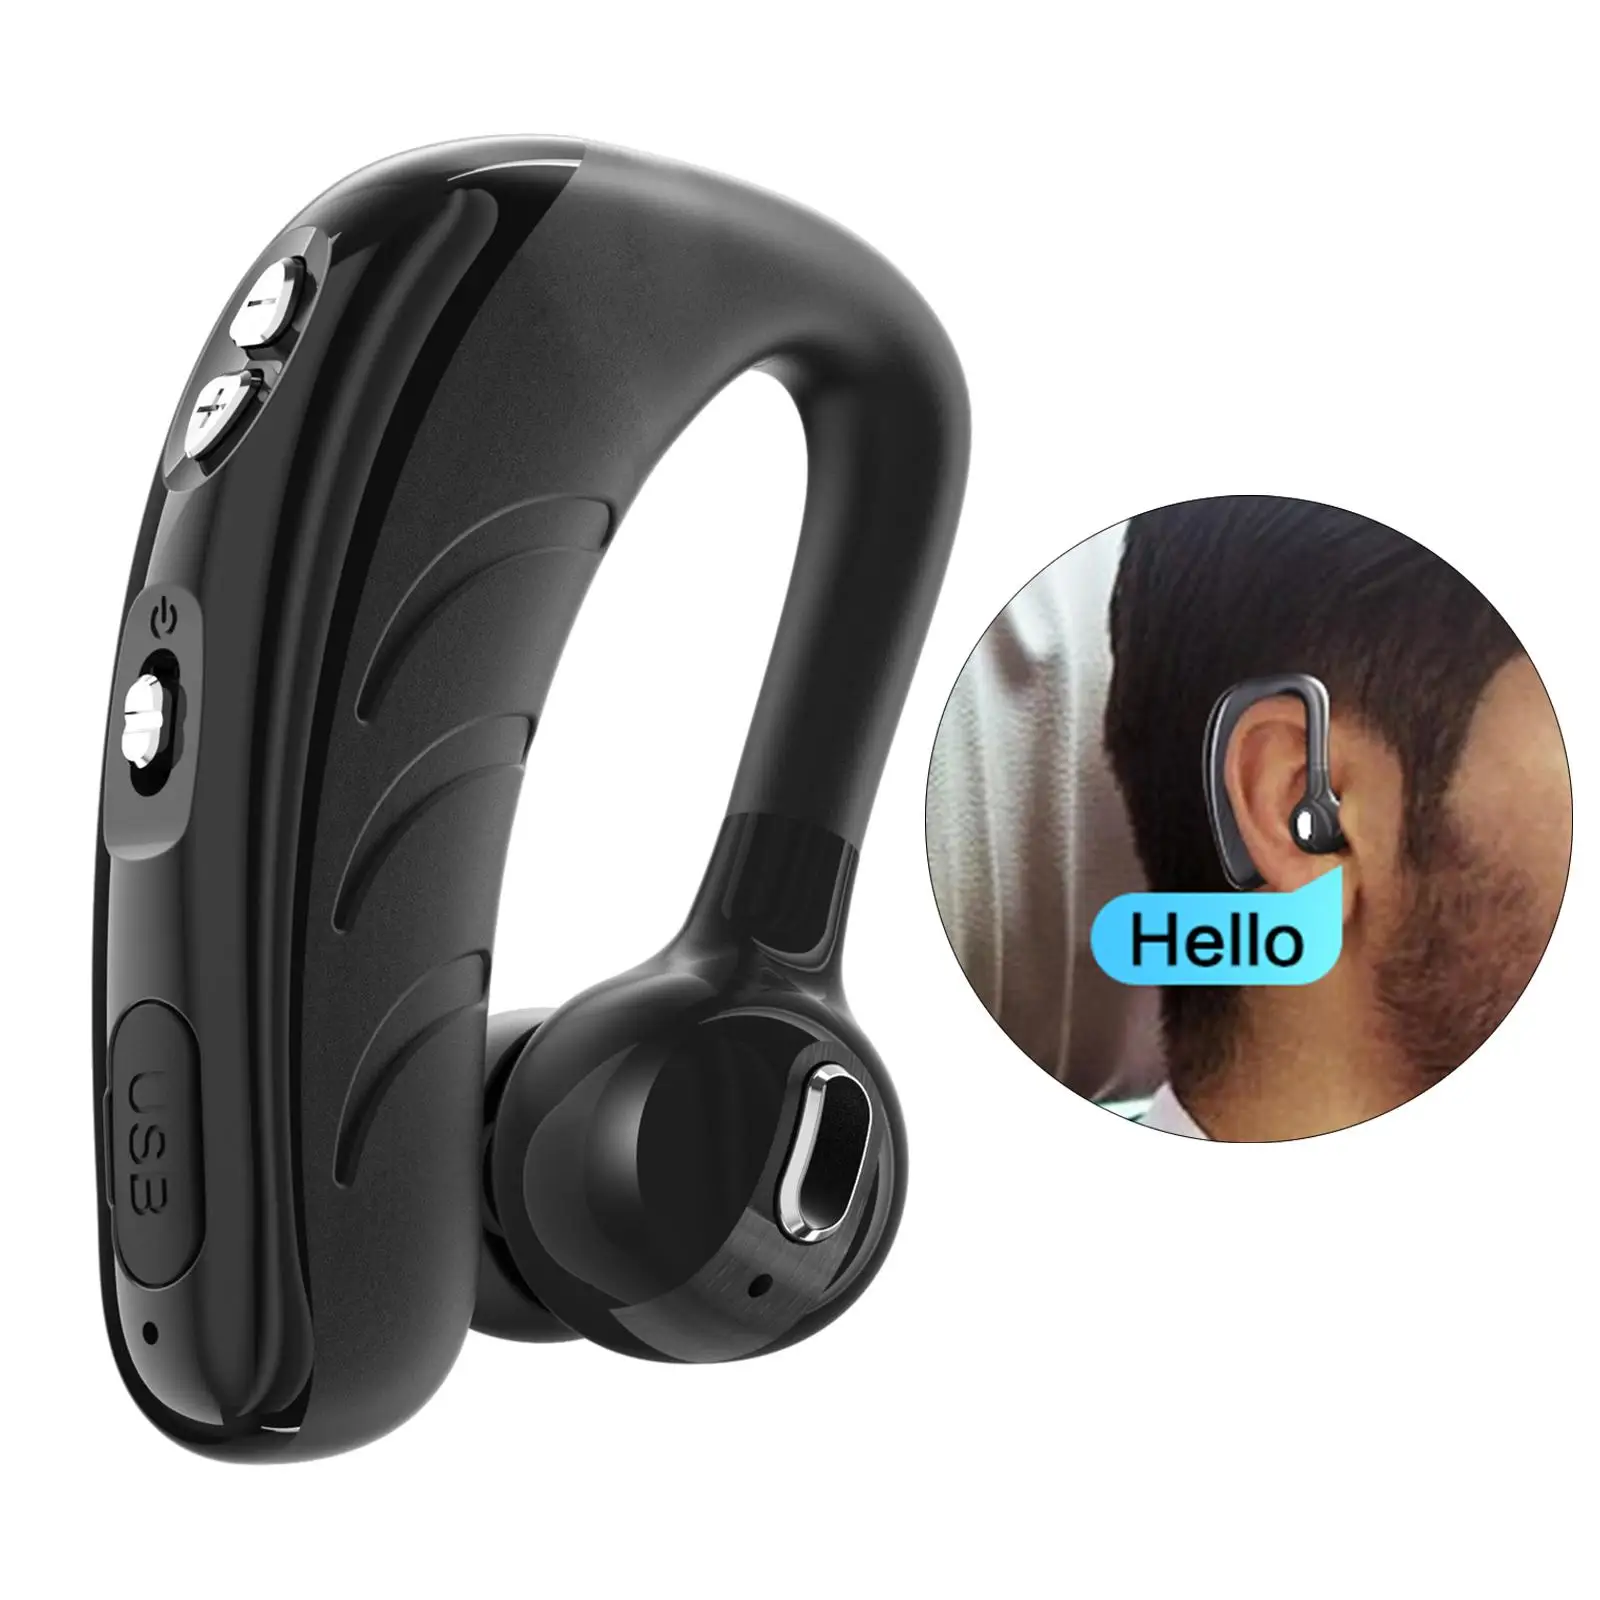  Headset V5.1 Earpiece Business Headphones Stereo Earphone with Noise Reduction Mic Phone,Office/Work Out/Driving